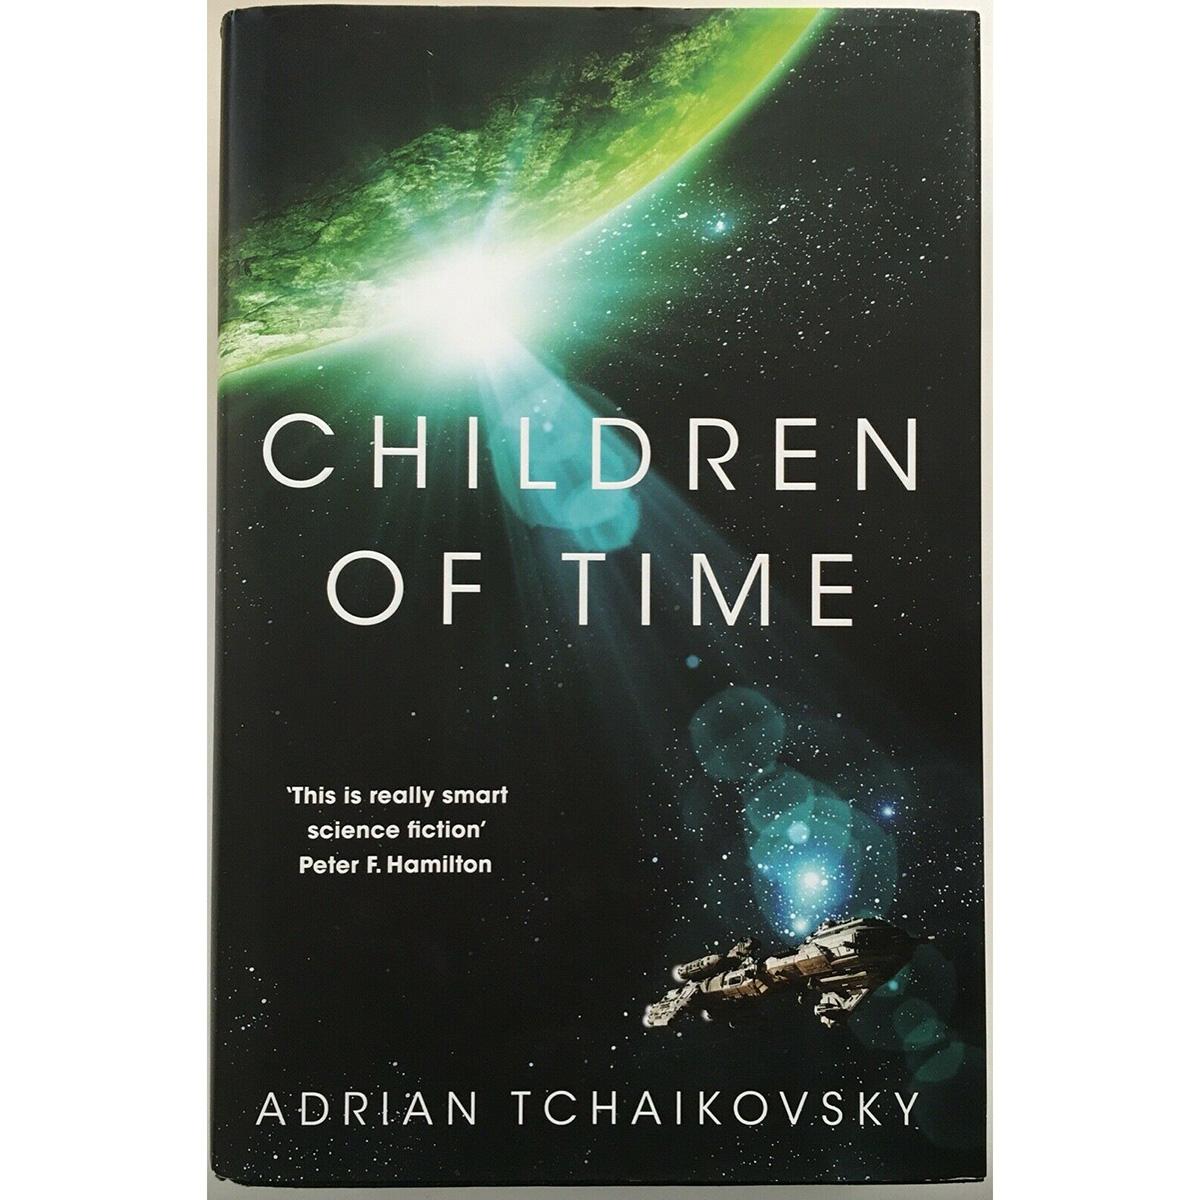 Children of Time by Adrian Tchaikovsky Kindle eBook for $2.99